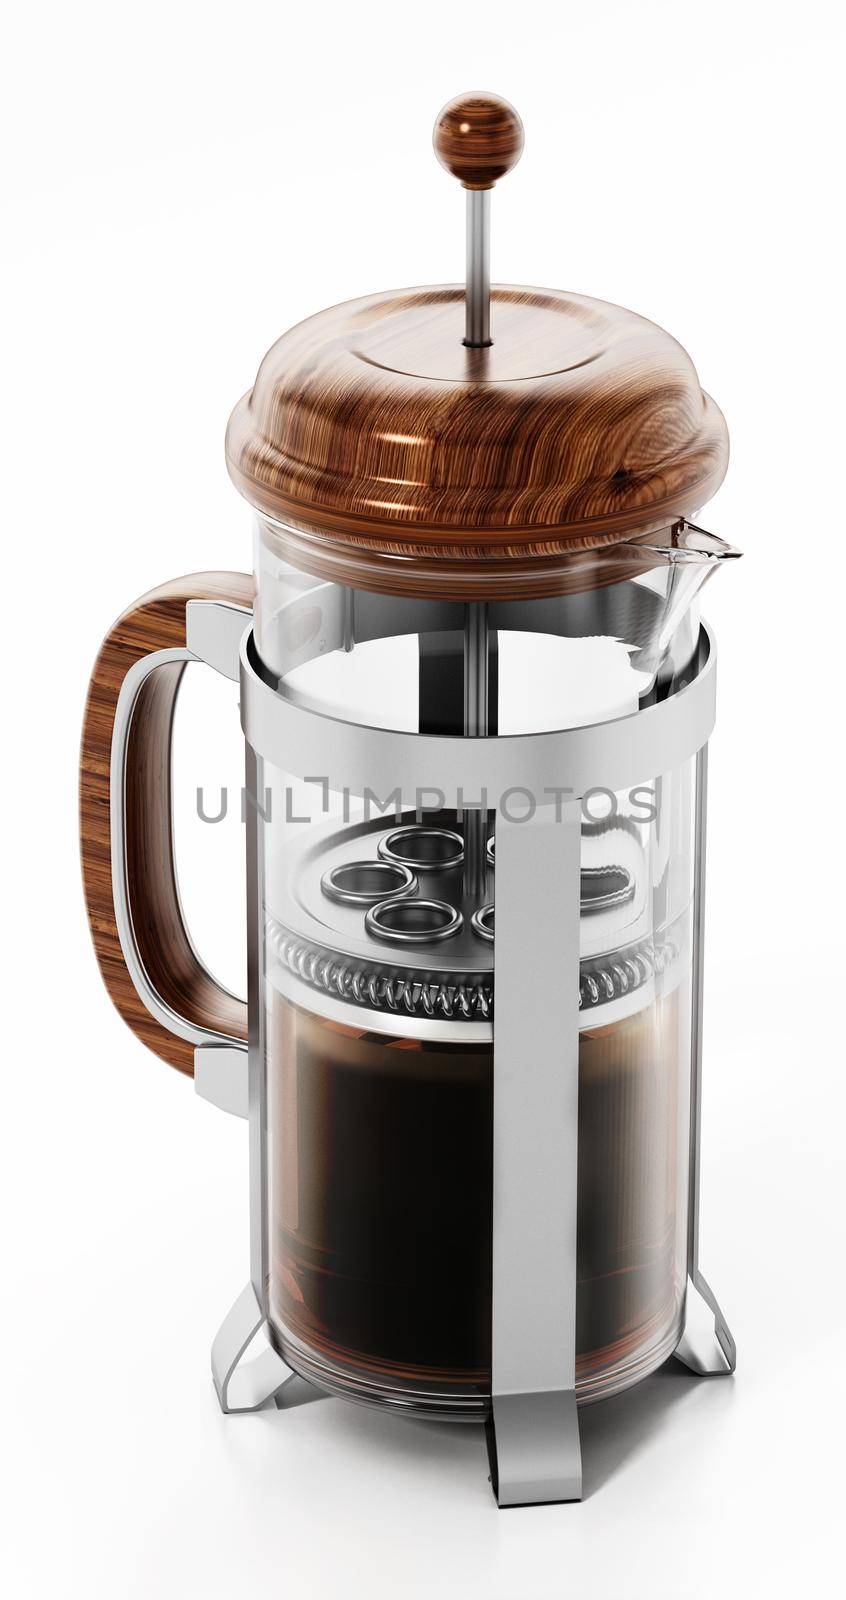 Fench press with coffee isolated on white background. 3D illustration by Simsek